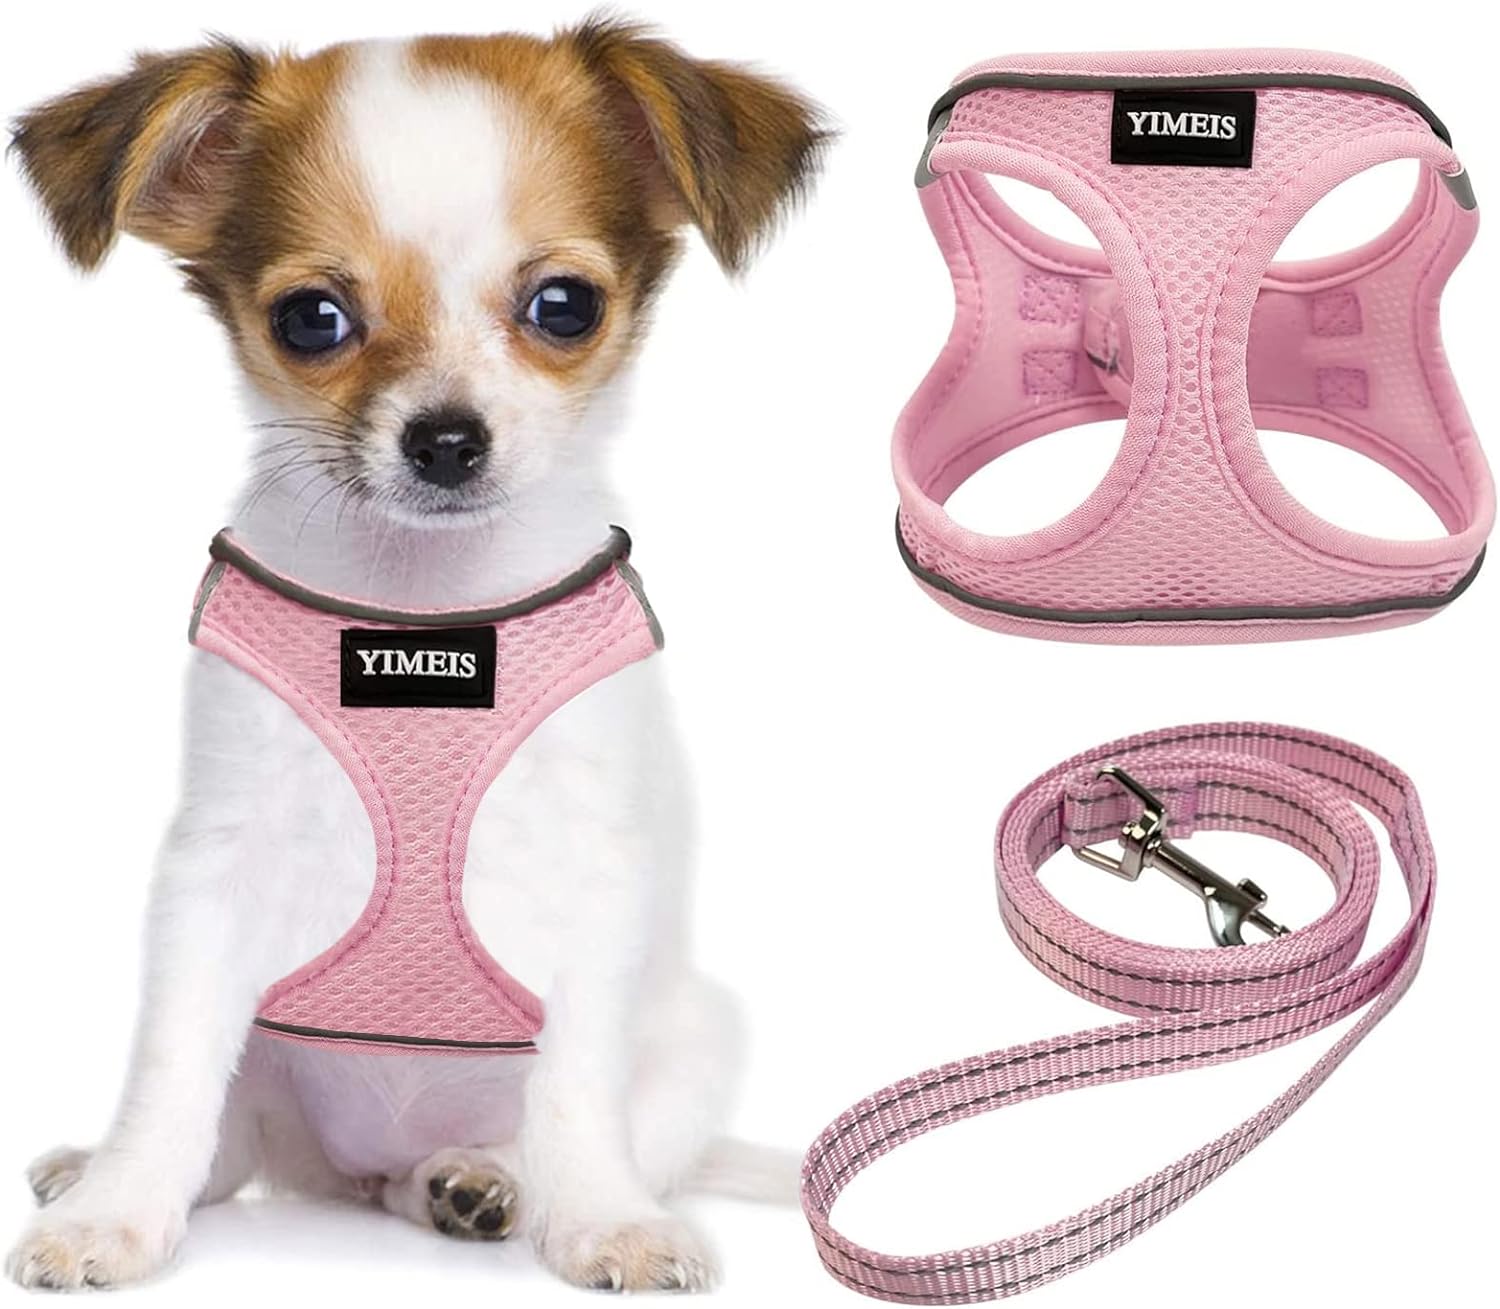 YIMEIS Dog Harness and Leash Set, No Pull Soft Mesh Pet Harness, Reflective Adjustable Puppy Vest for Small Medium Large Dogs, Cats (Pink, Small (Pack of 1)